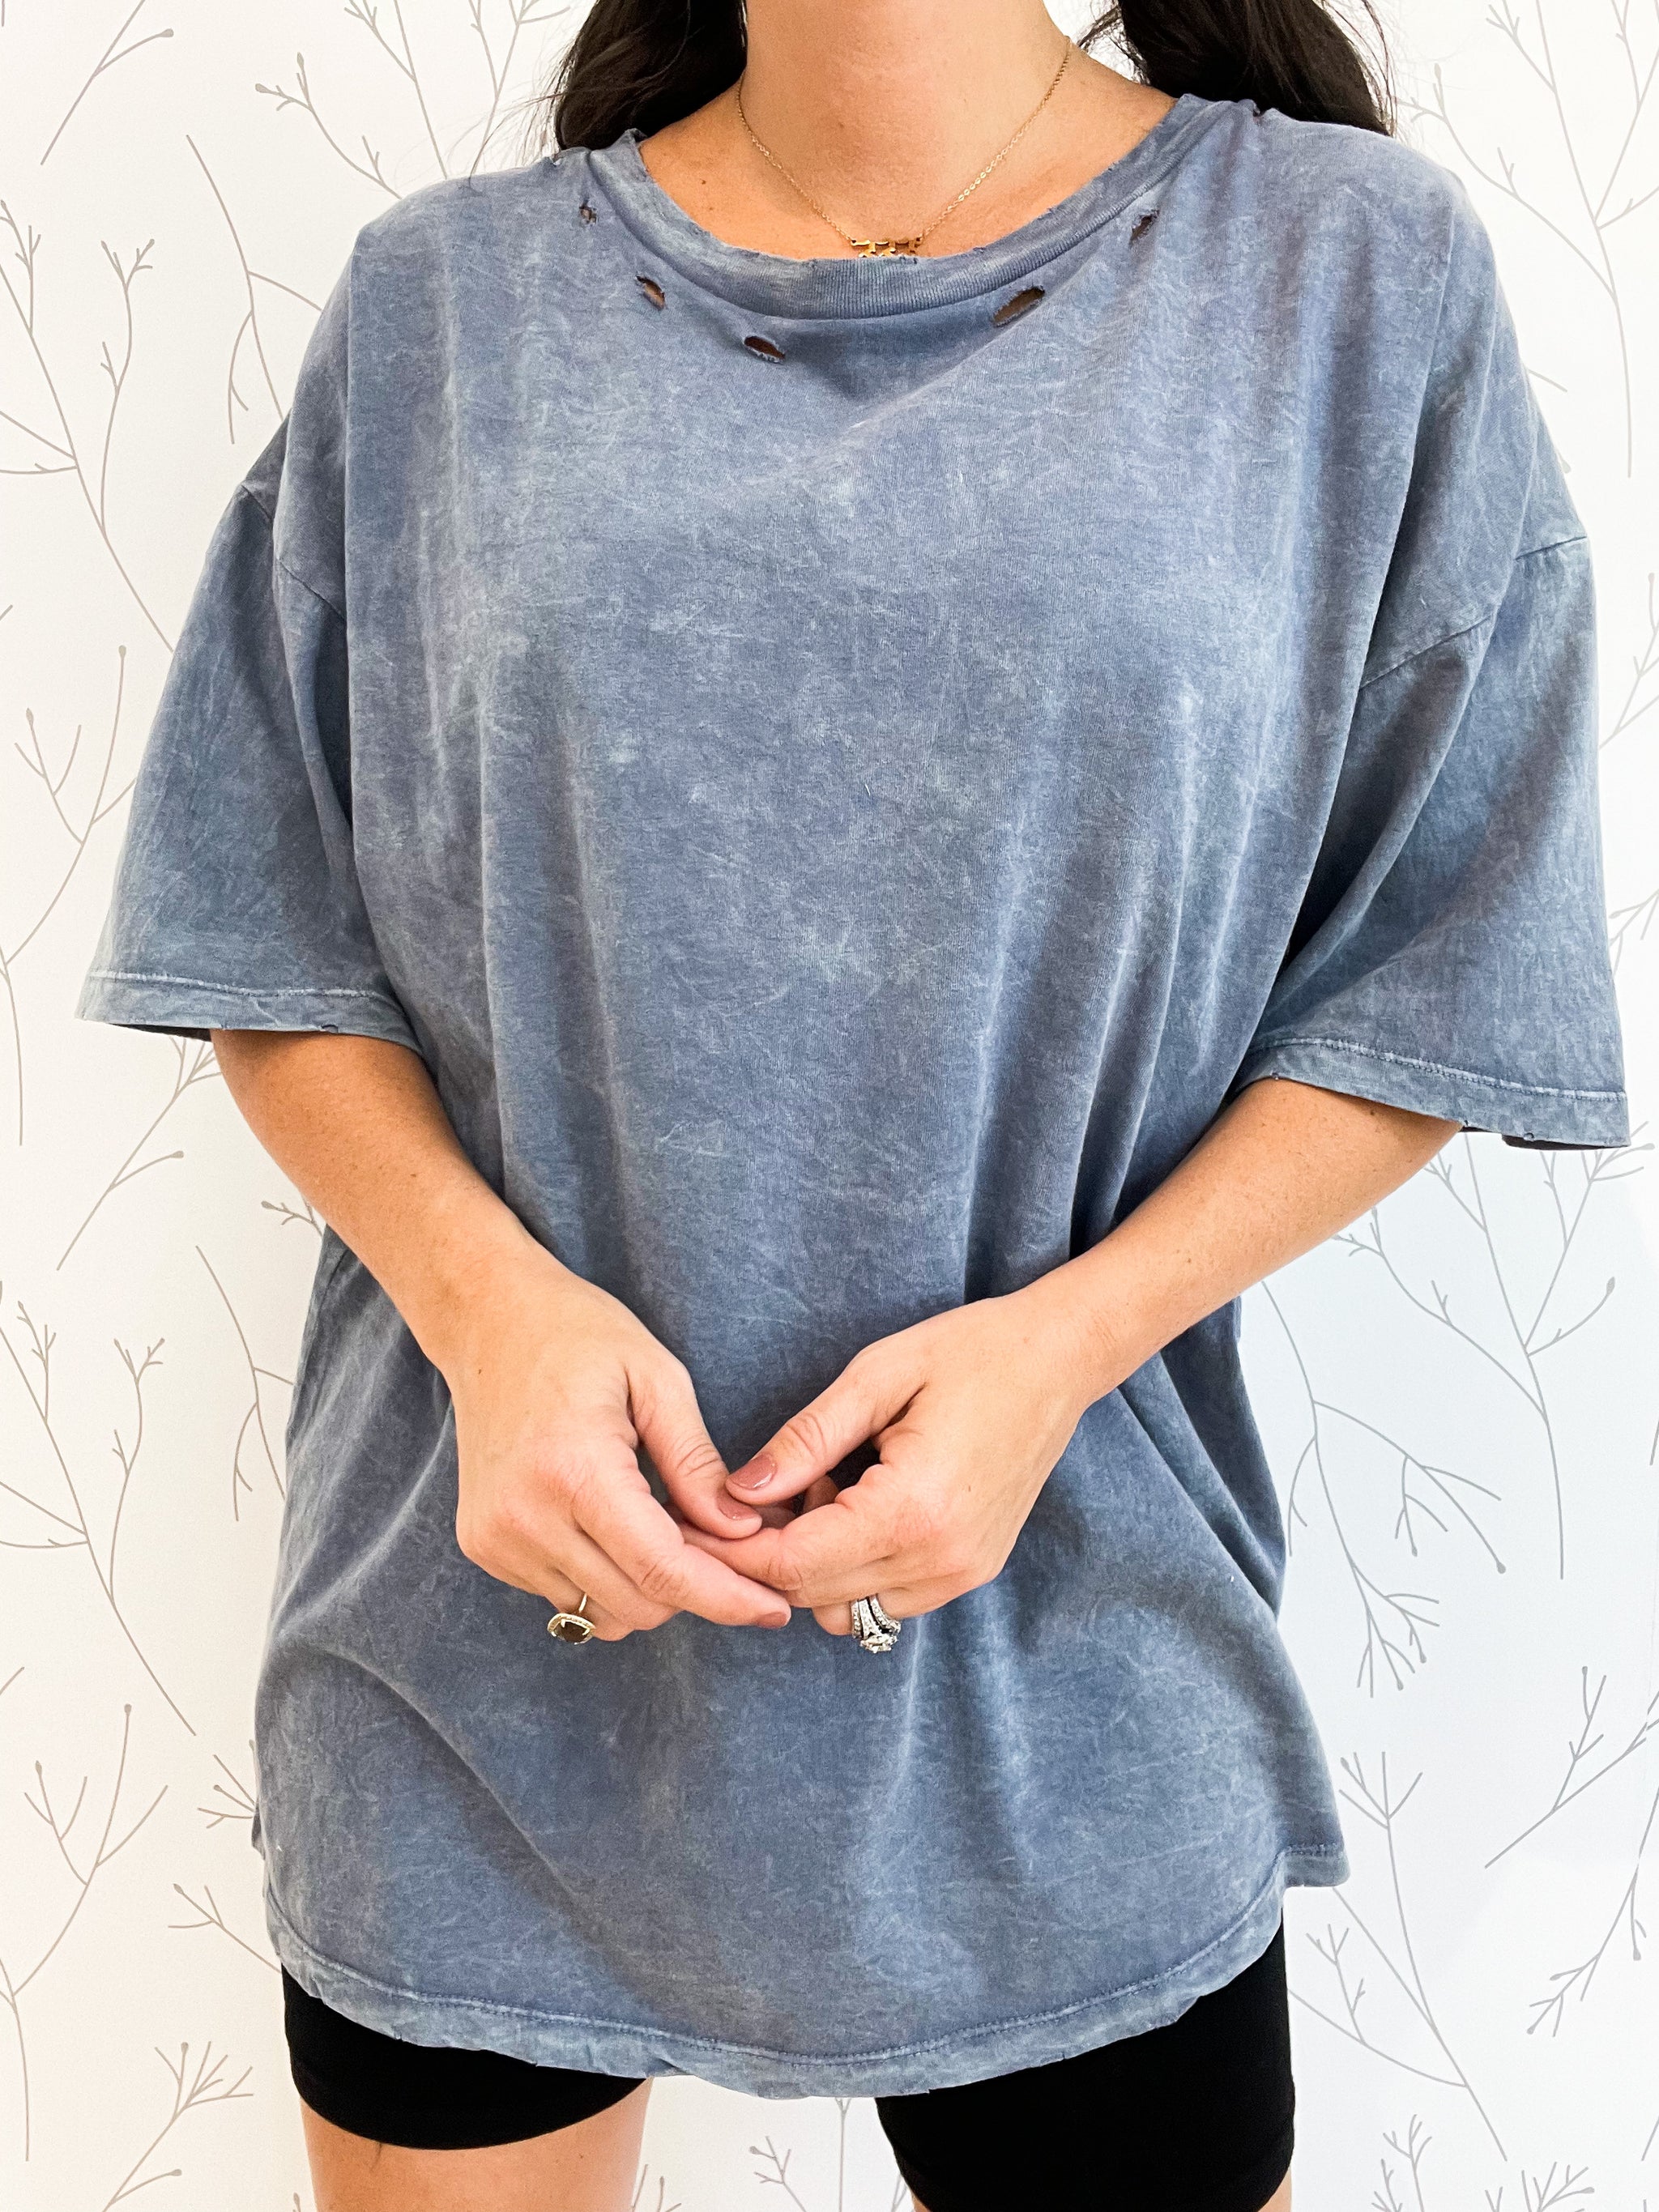 Mineral Wash Oversized Distressed Tee